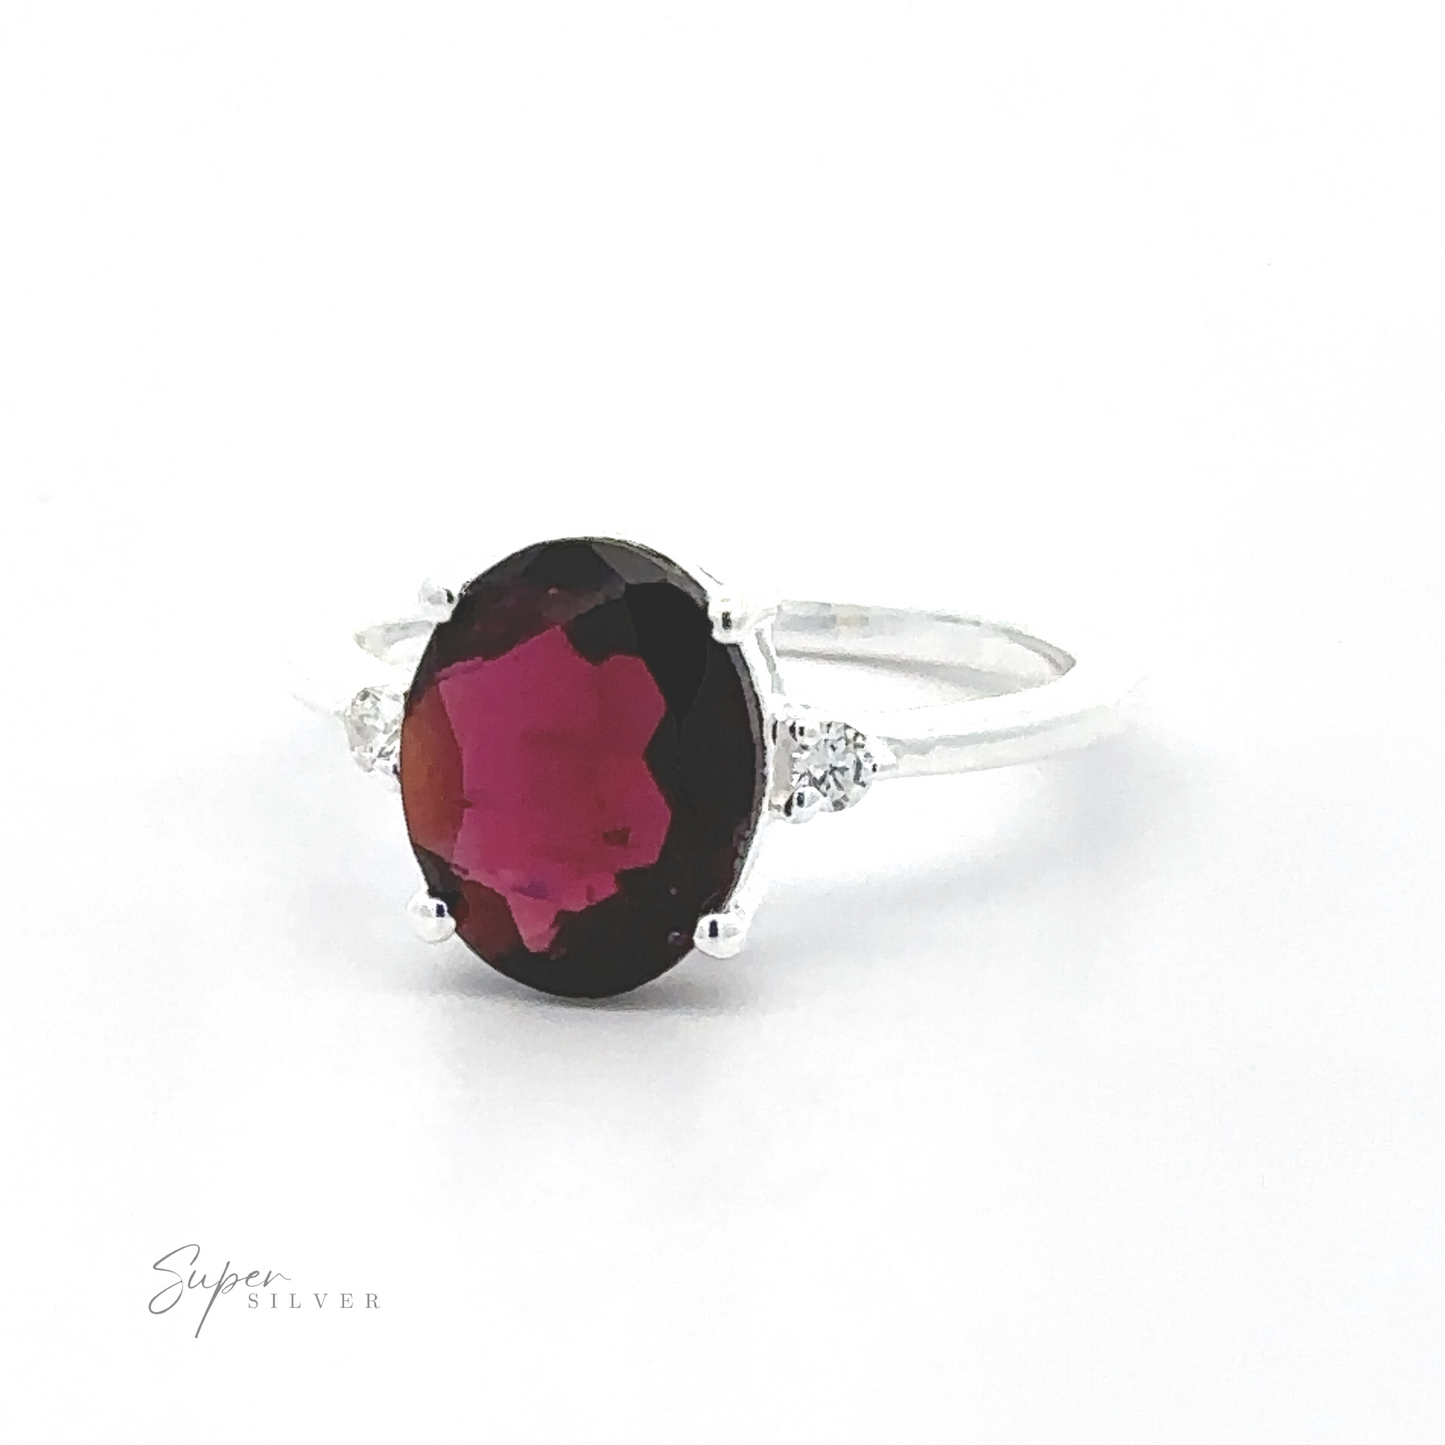 
                  
                    Brilliant Pronged Oval Gemstone Ring with a large oval garnet in a prong setting, flanked by two small diamonds, displayed against a white background.
                  
                